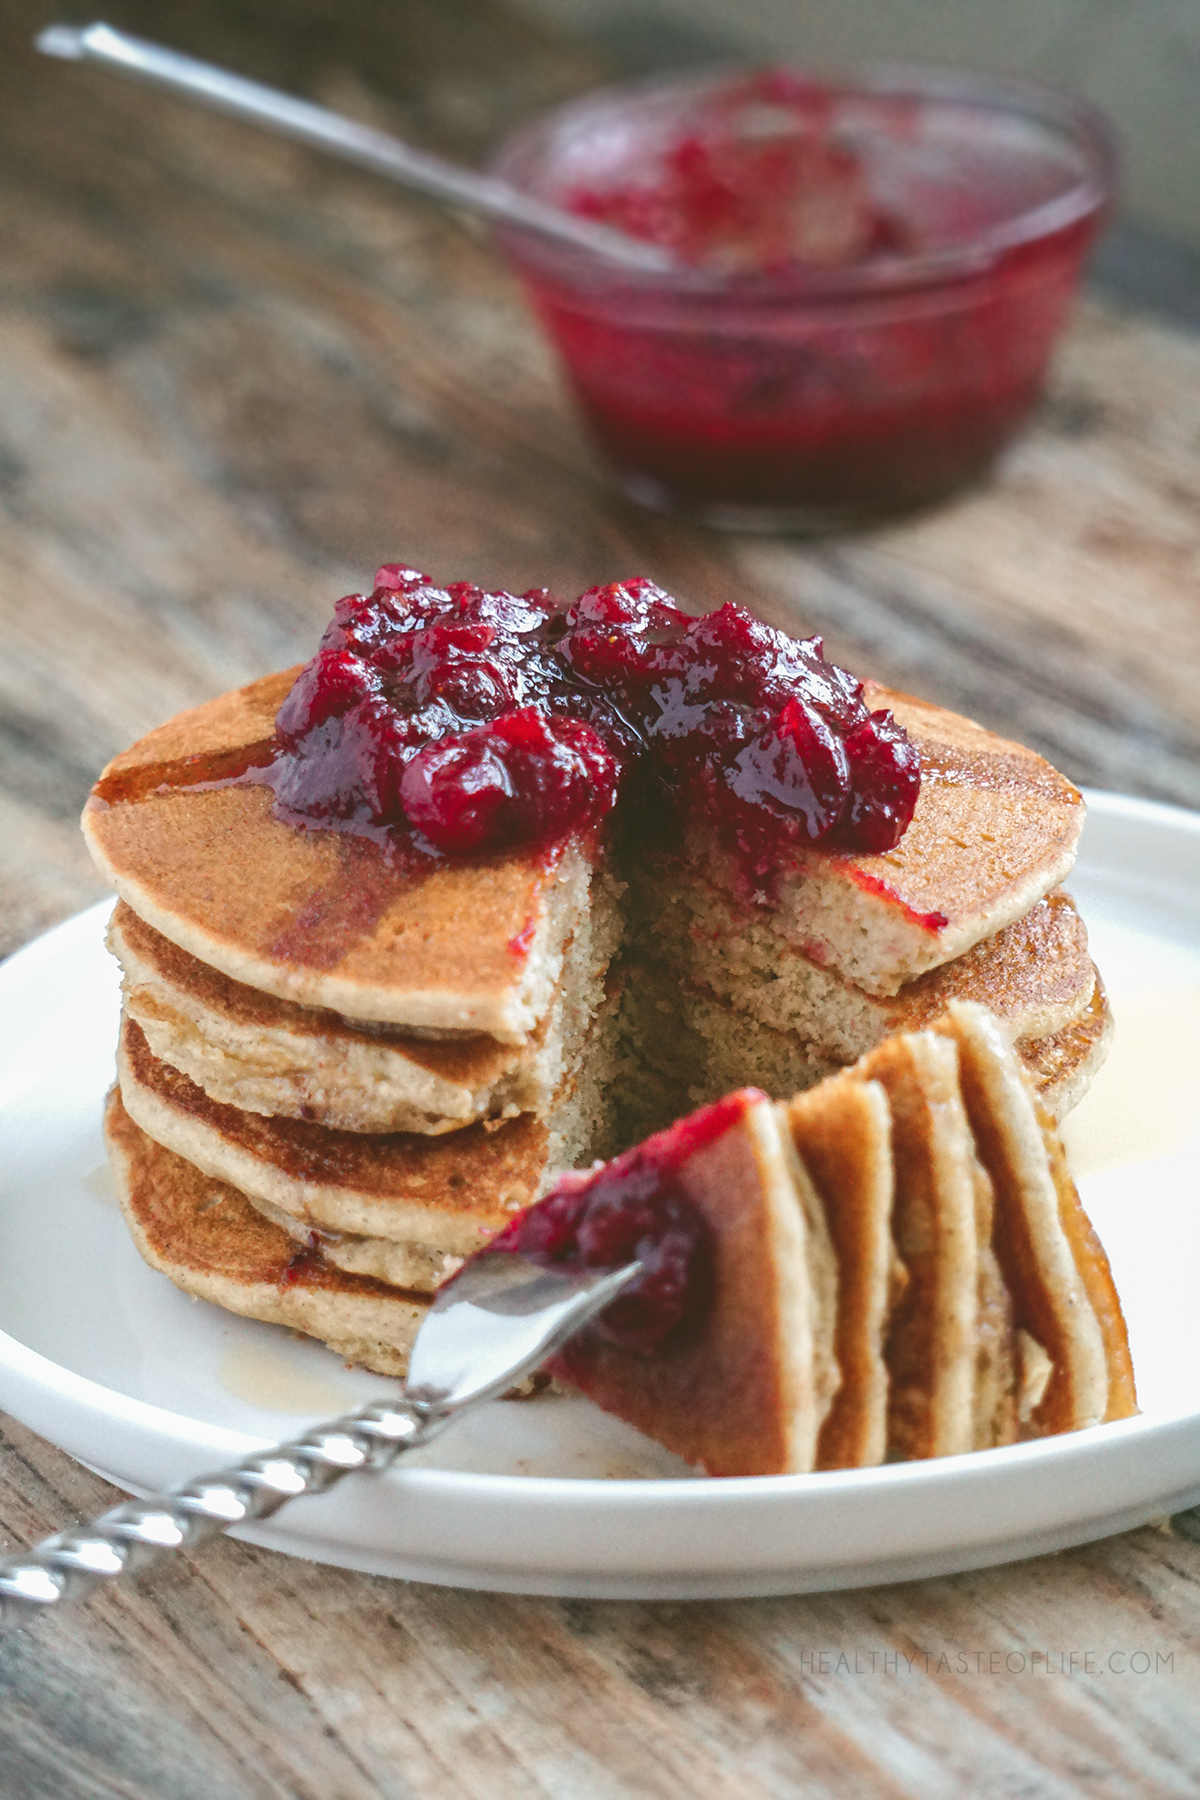 Stack of gluten free sourdough pancakes cut - fluffy soft inside, topped with a cranberry sauce.